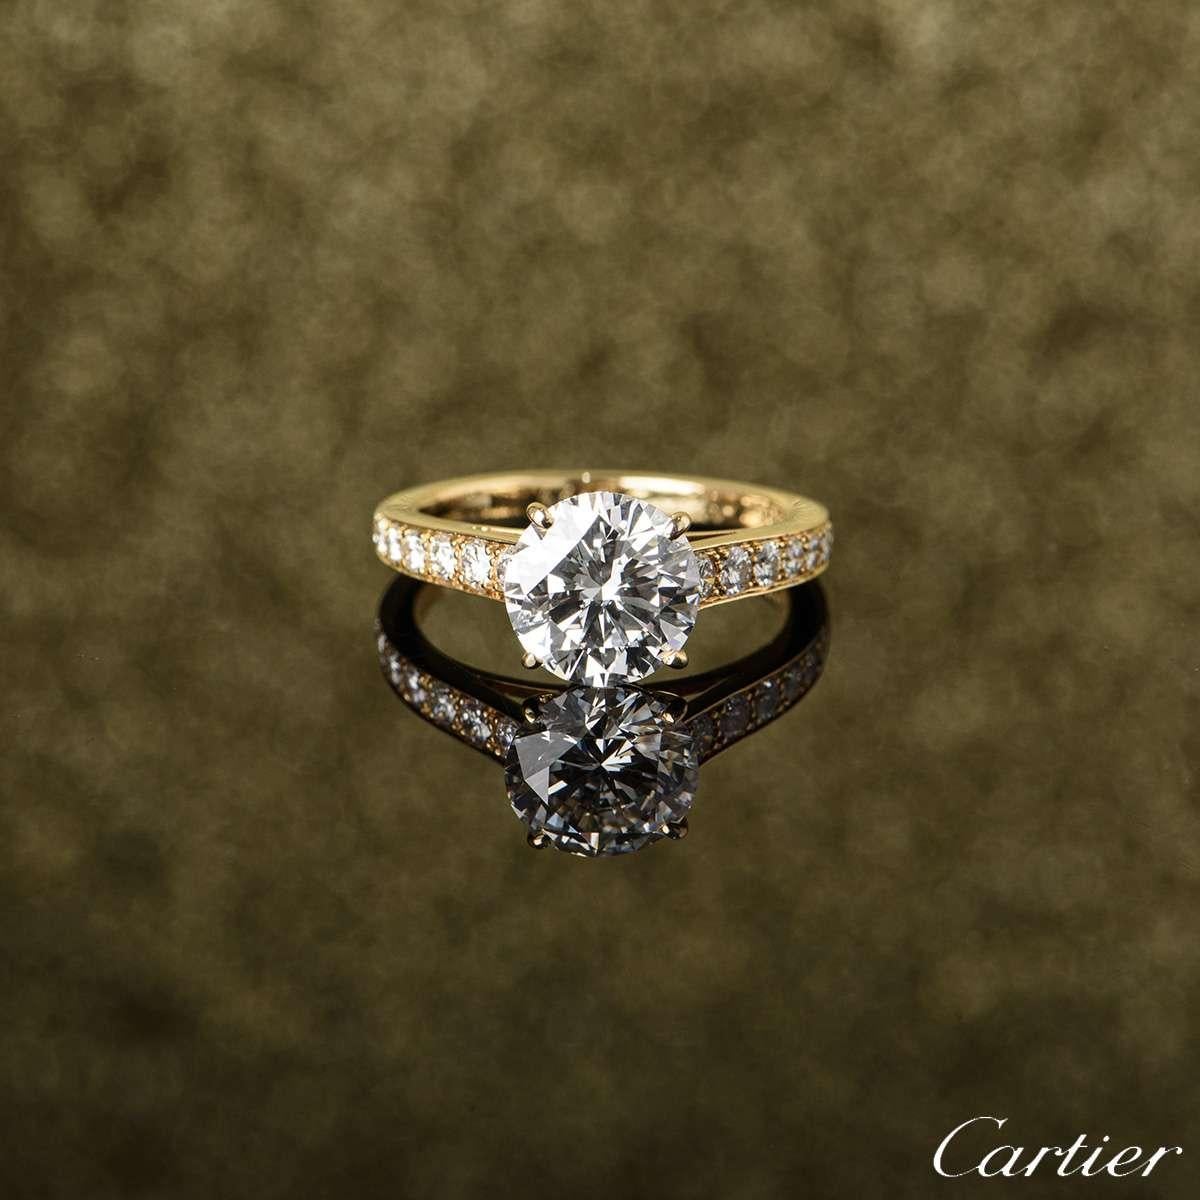 Round Cut Cartier Solitaire 1895 Diamond Engagement Ring 2.02 Carat D/VS1 GIA Certified